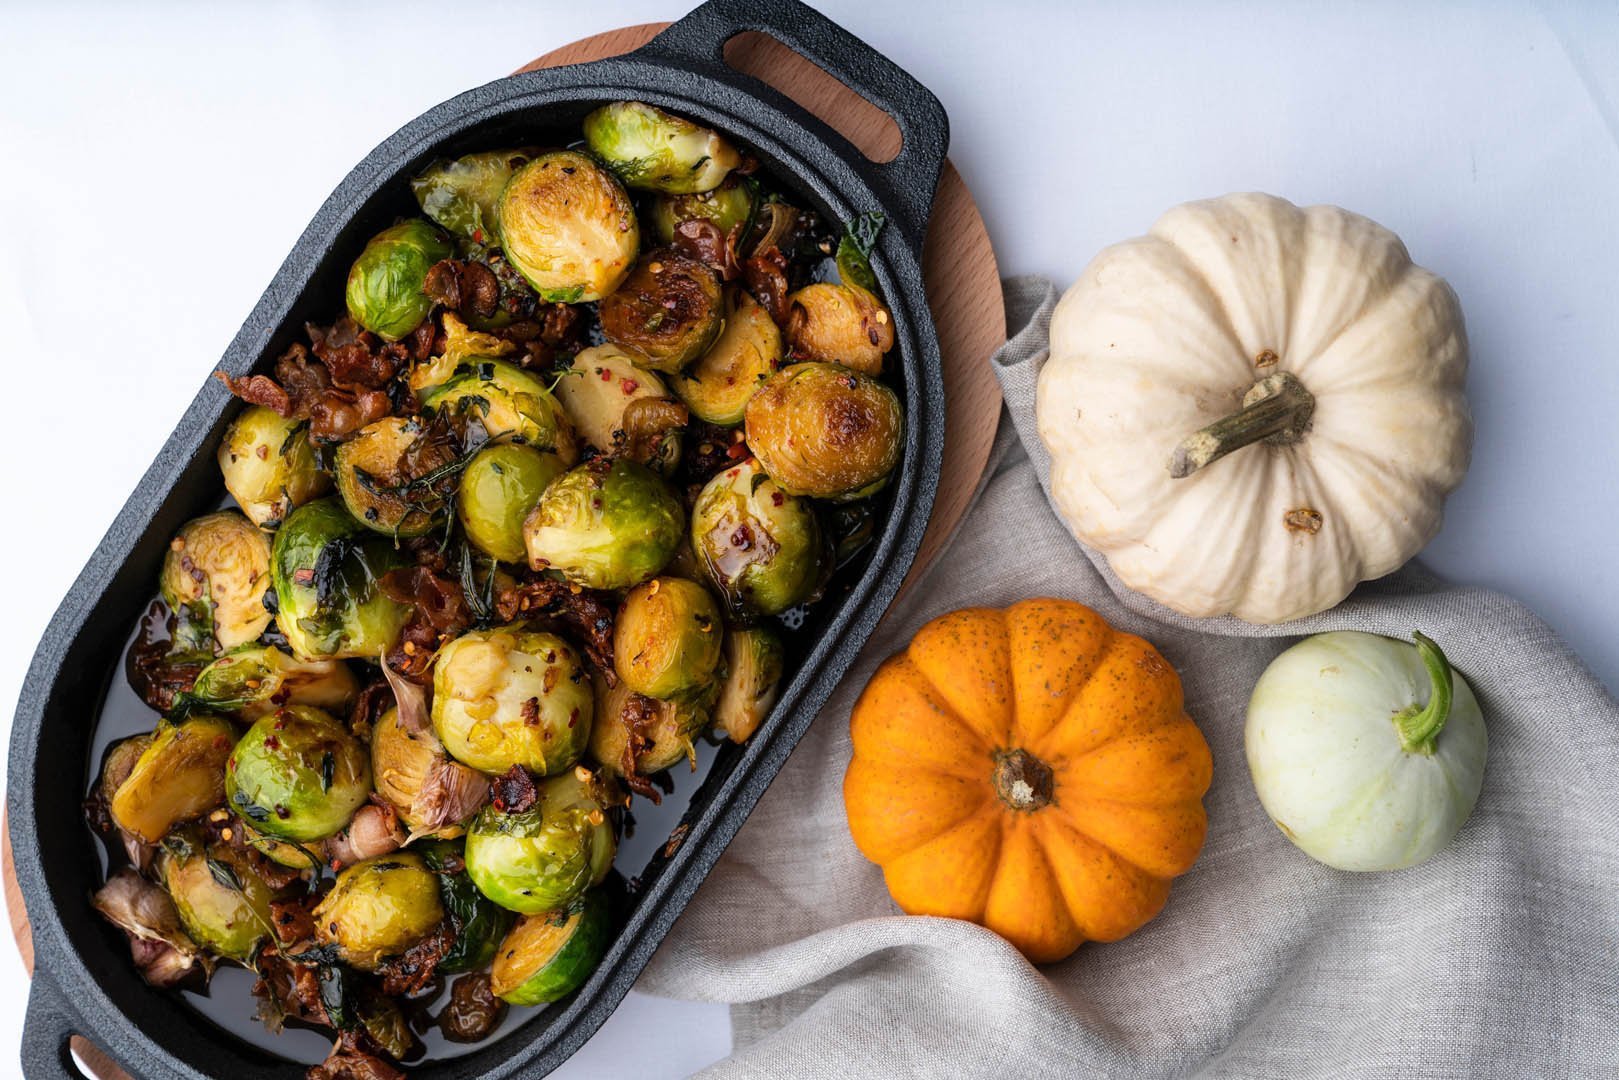 How To Cook Brussel Sprouts In A Electric Skillet